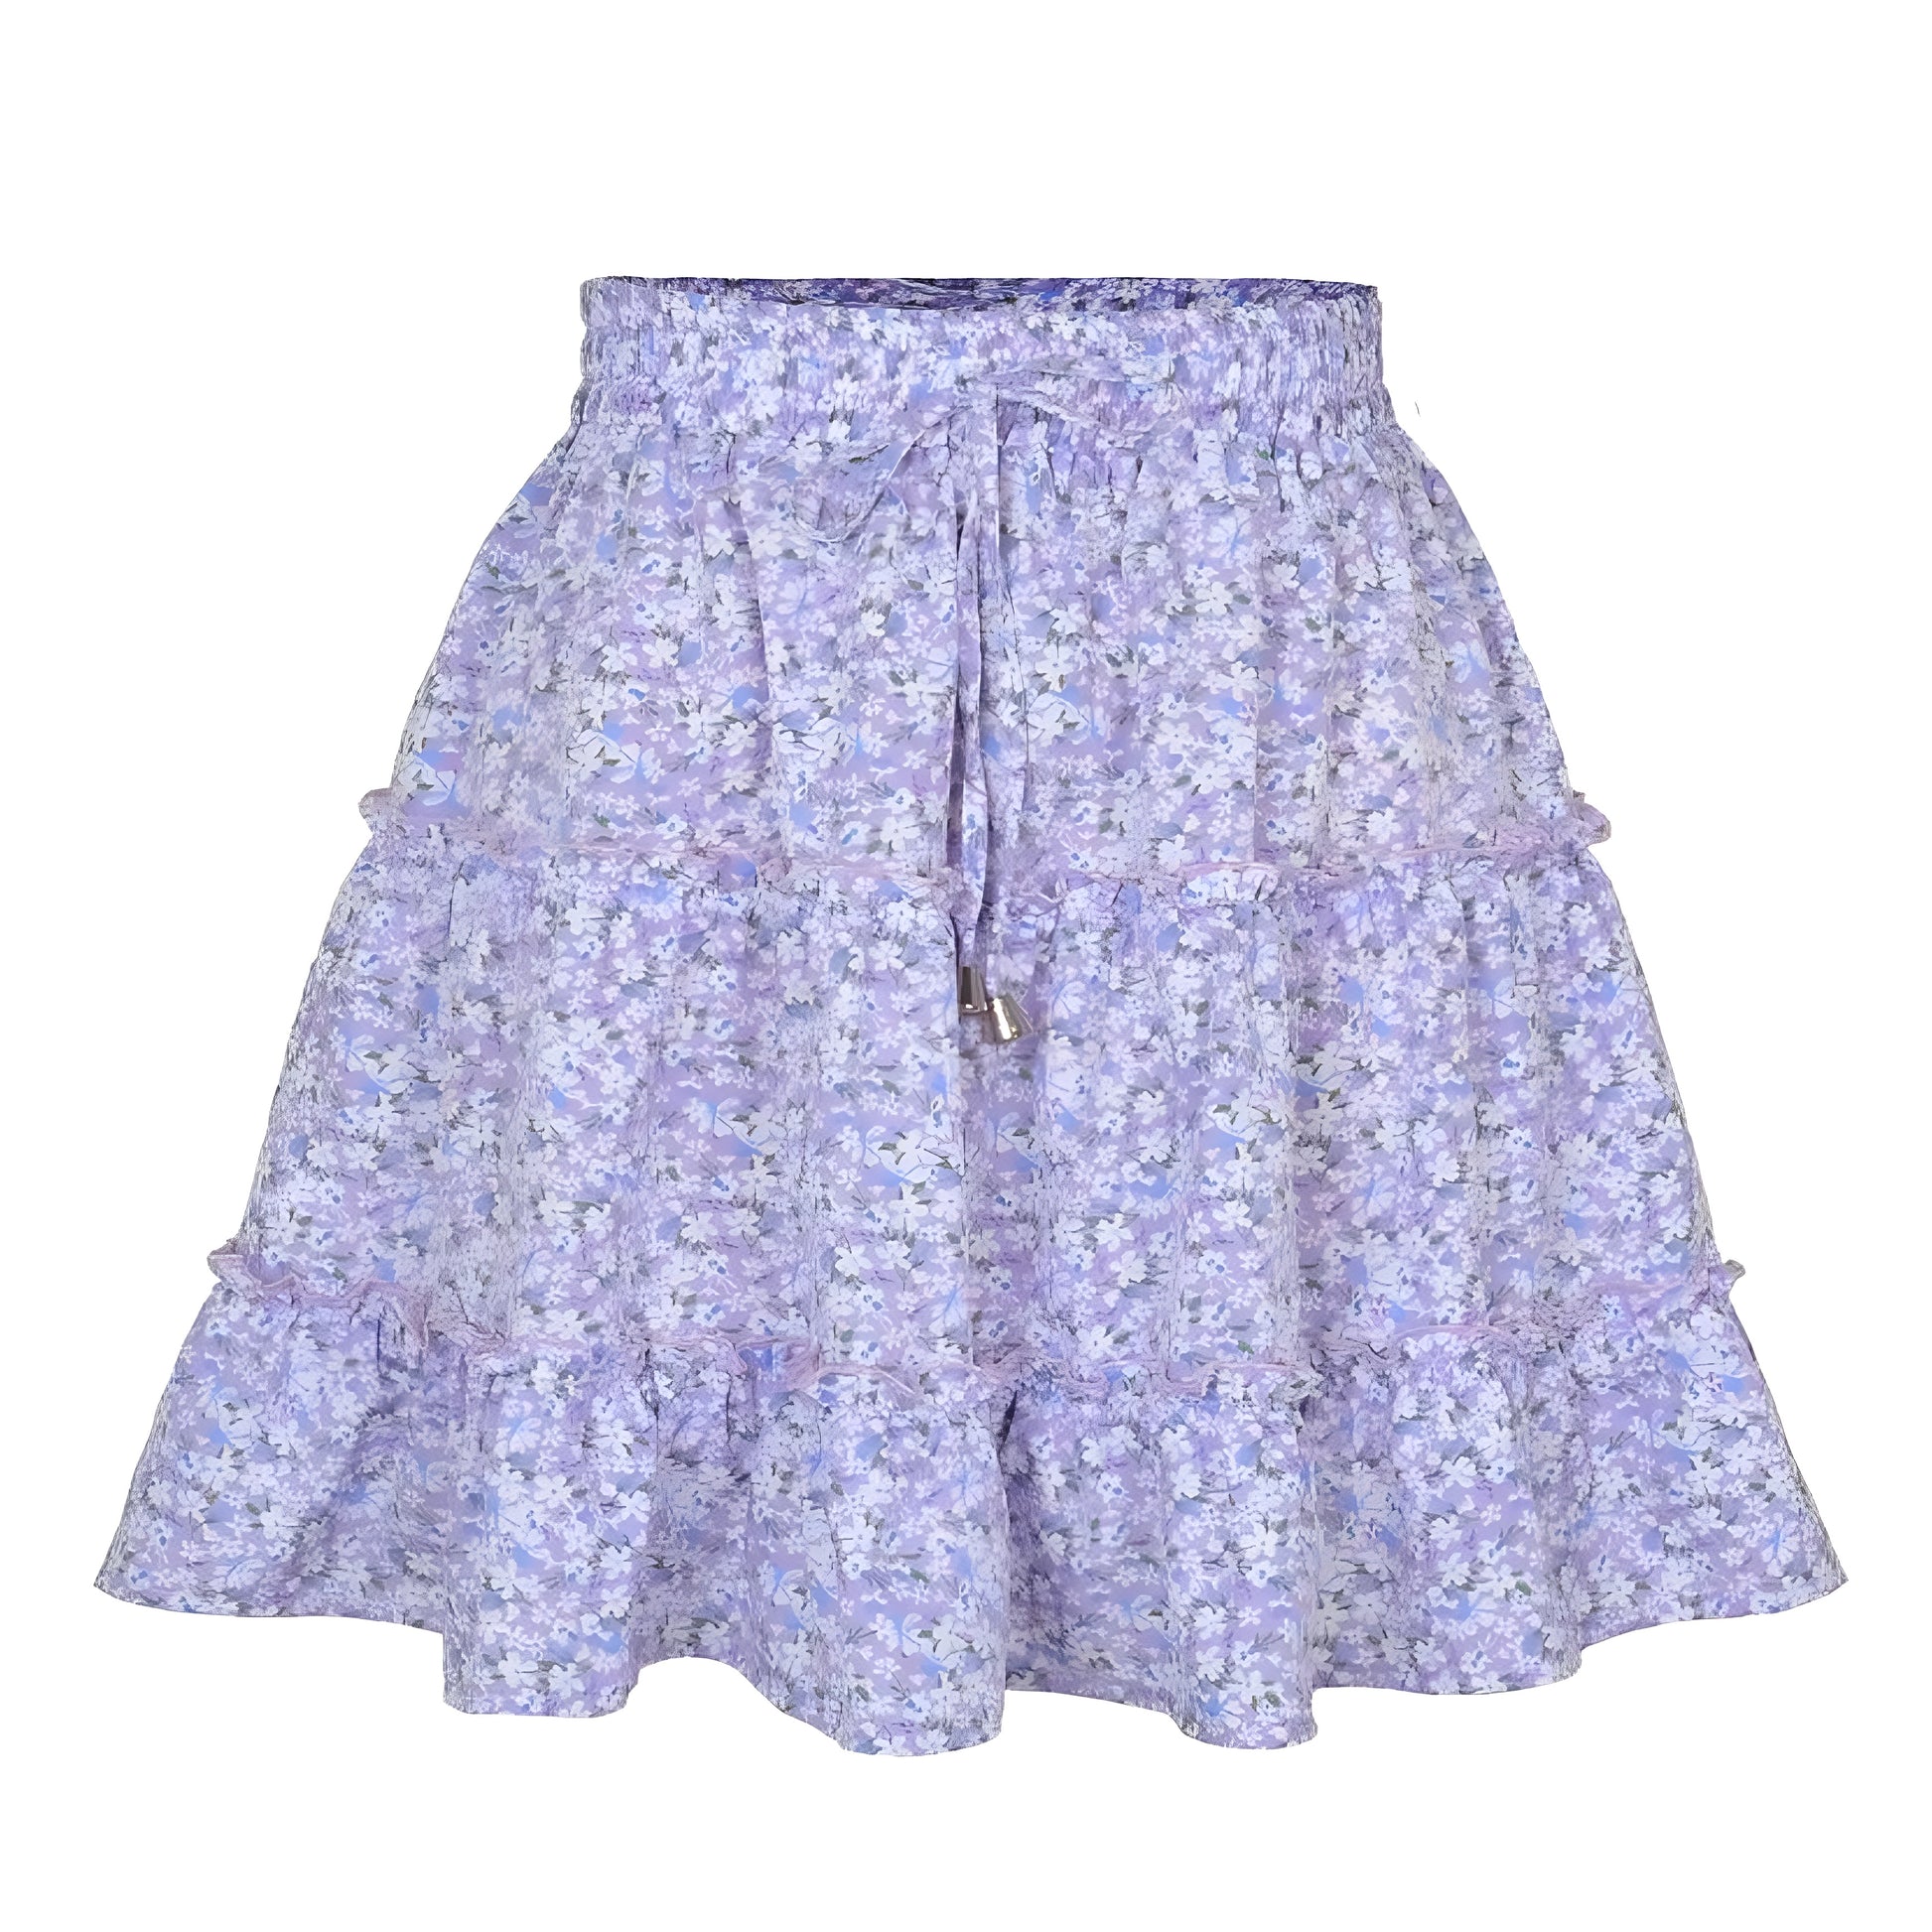 floral-print-light-purple-and-white-lavender-daisy-flower-patterned-layered-ruffle-trim-draw-string-tie-fitted-waist-smocked-mid-high-rise-waisted-flowy-boho-tullie-linen-tiered-short-mini-skirt-women-ladies-chic-trendy-spring-2024-summer-elegant-casual-feminine-preppy-style-zara-altard-state-urban-outfitters-brandy-melville-princess-polly